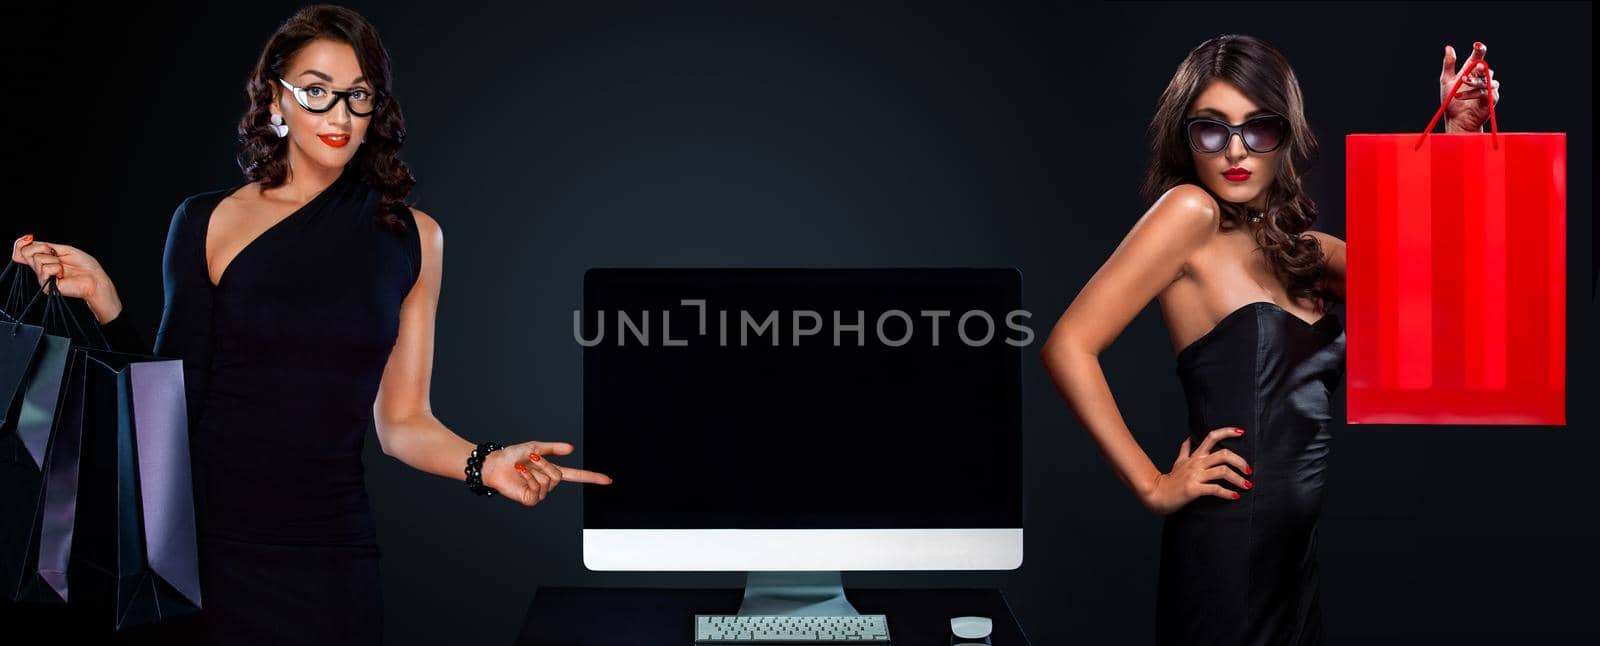 Black friday and Cyber Monday sale concept for shop. Two women holding bags and pointing on computer isolated on dark background by MikeOrlov